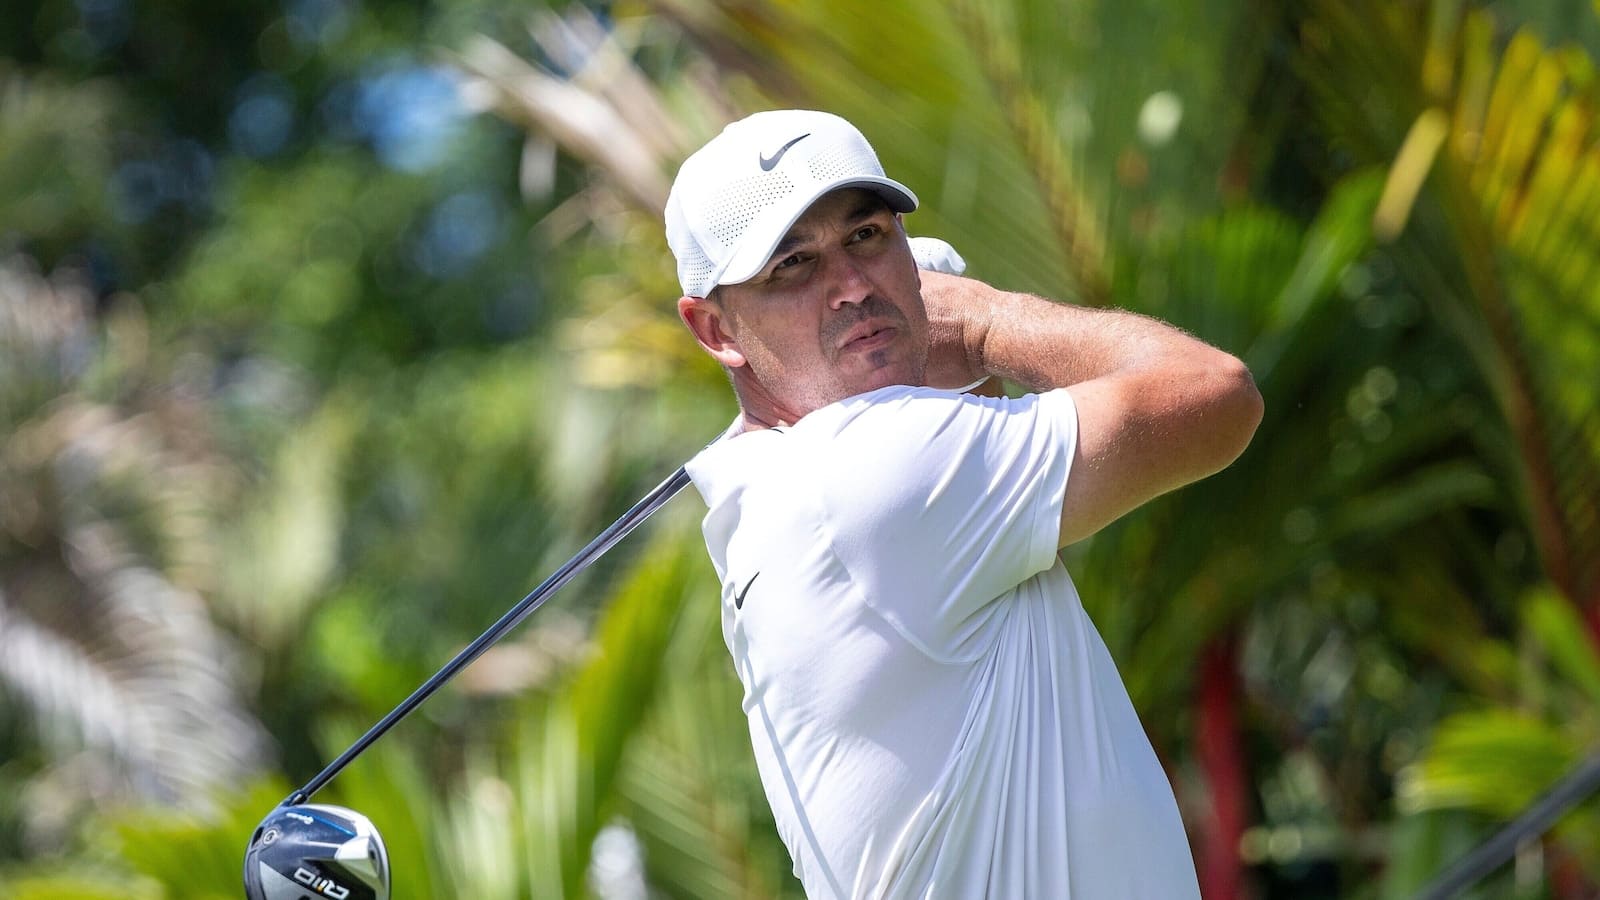 Analysis: Brooks Koepka has a big game. He doesn’t need a lot of words